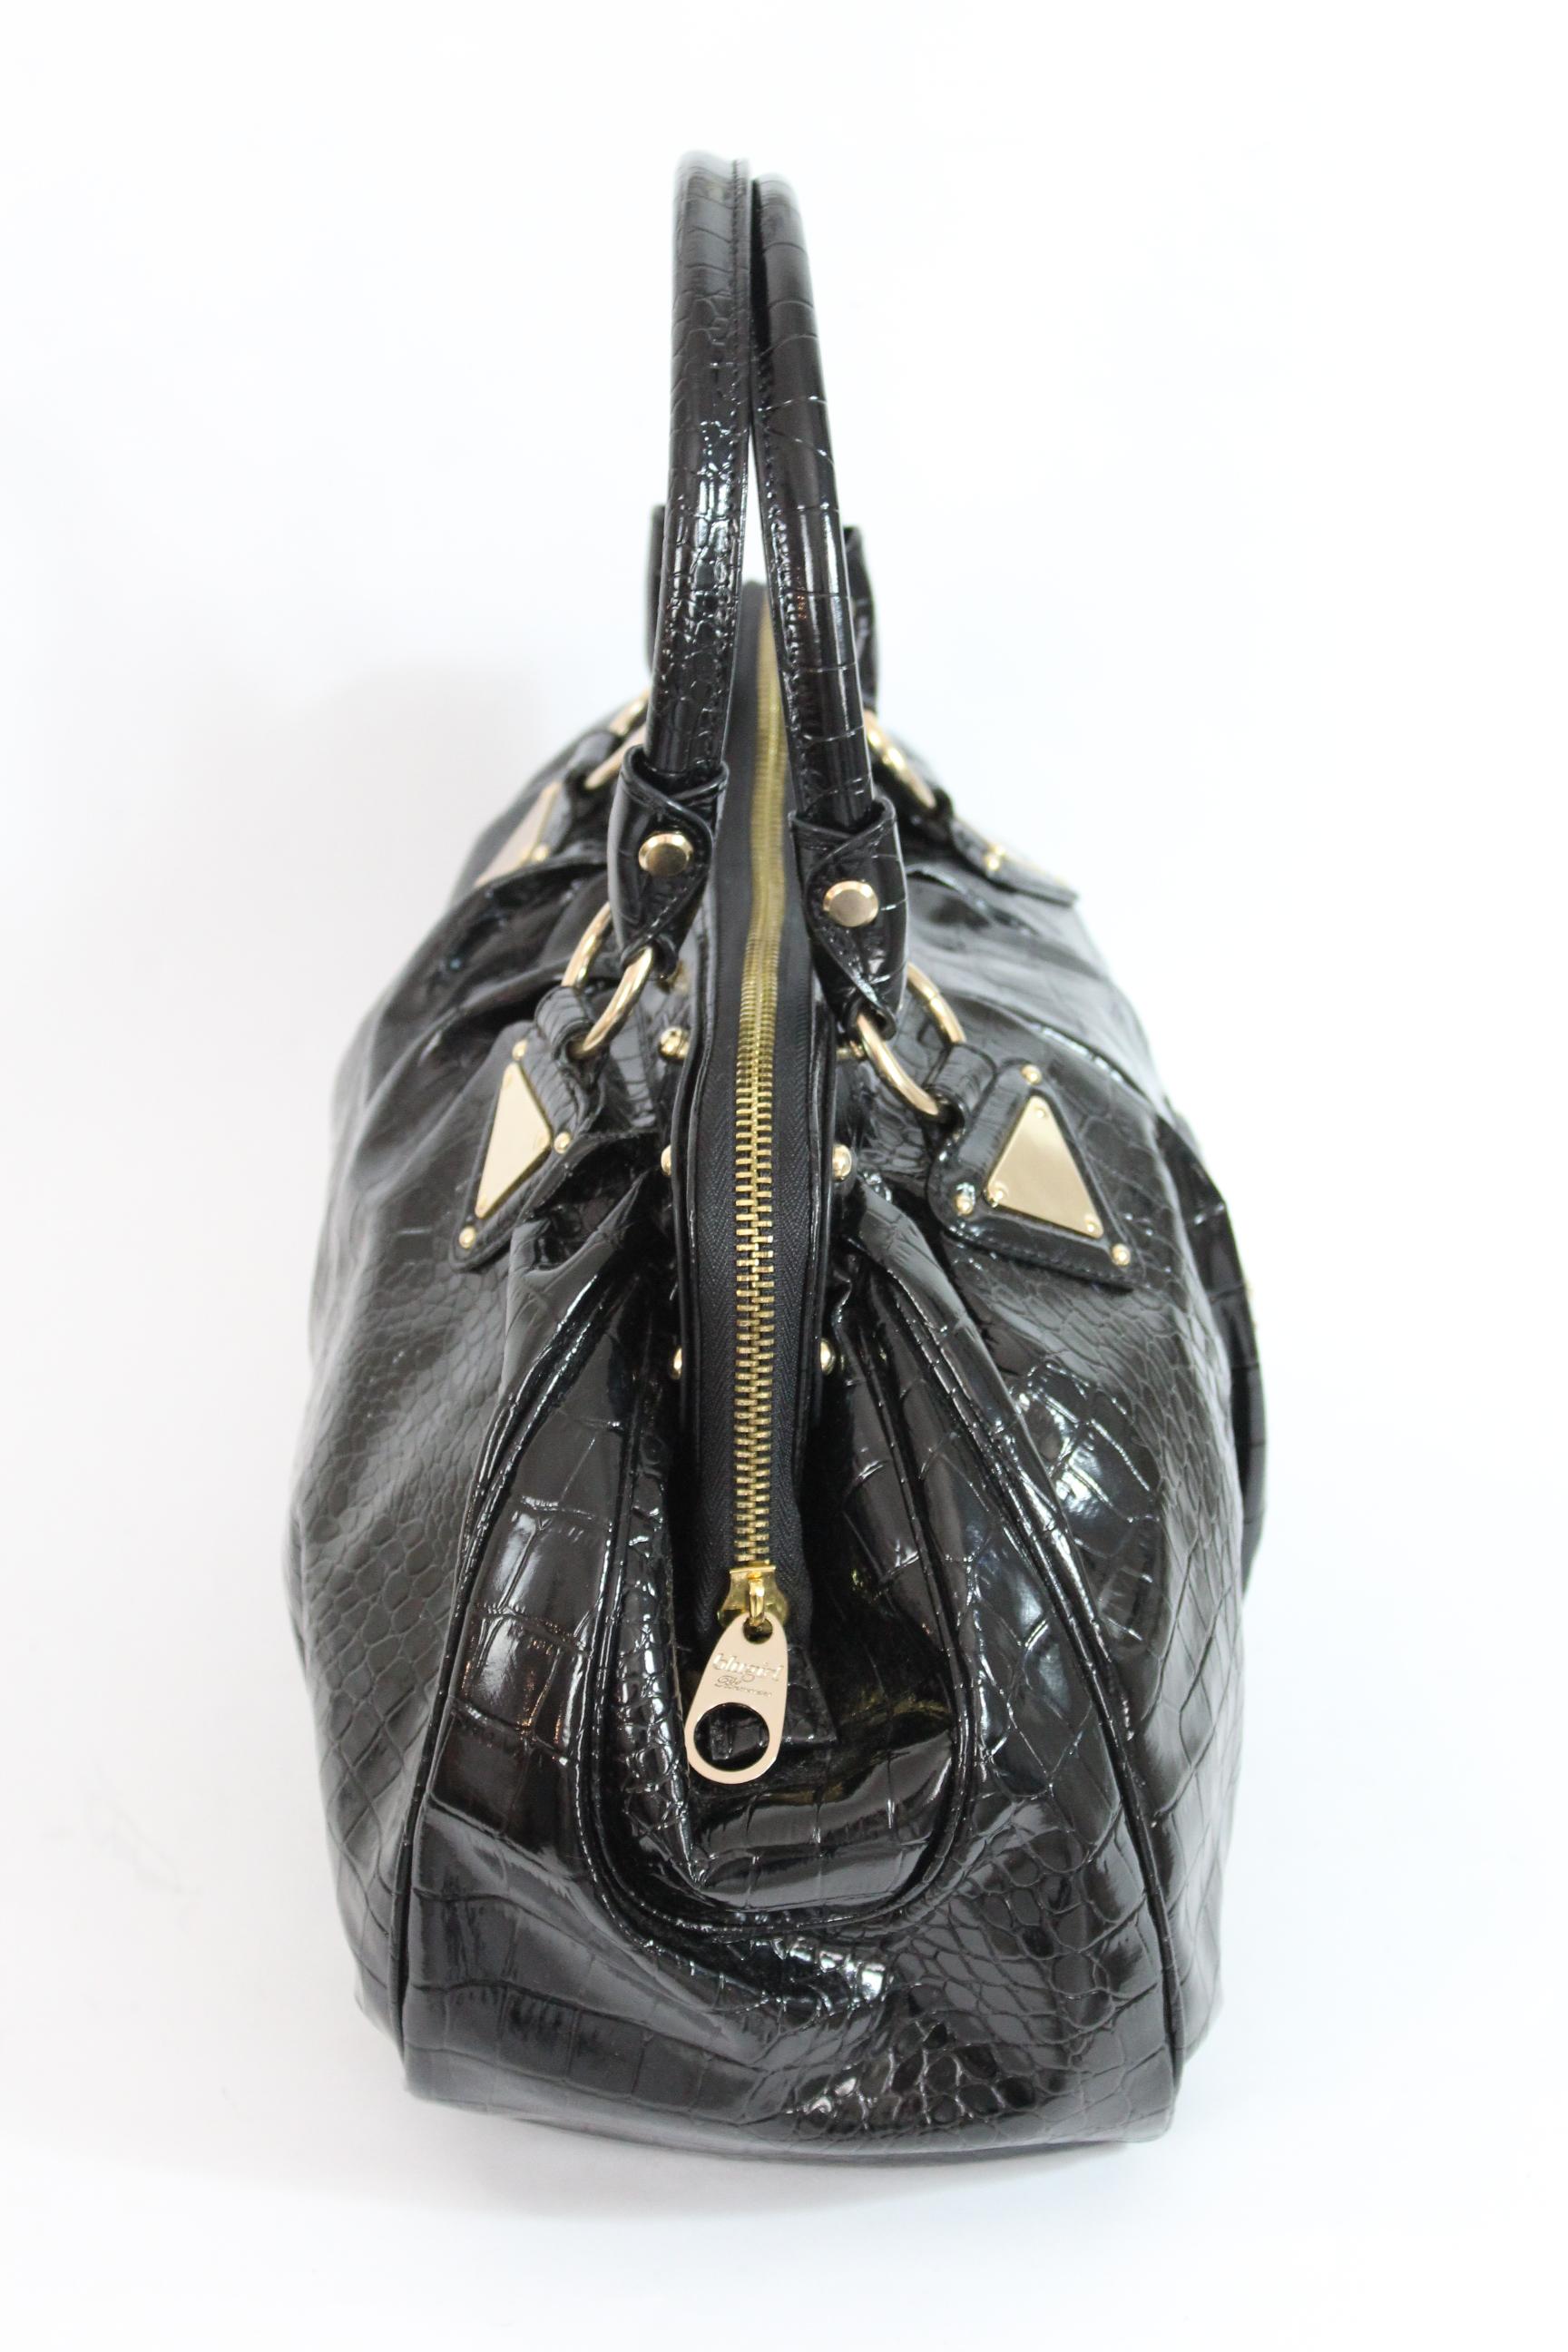 Blumarine Blugirl line 90s vintage bag. Large handbag, black with gold-colored details, crocodile print. Zip closure, patent fabric. Made in Italy. Excellent vintage condition. The dustbag is present.

Height: 28 cm
Width: 43 cm
Depth: 11 cm
Handle